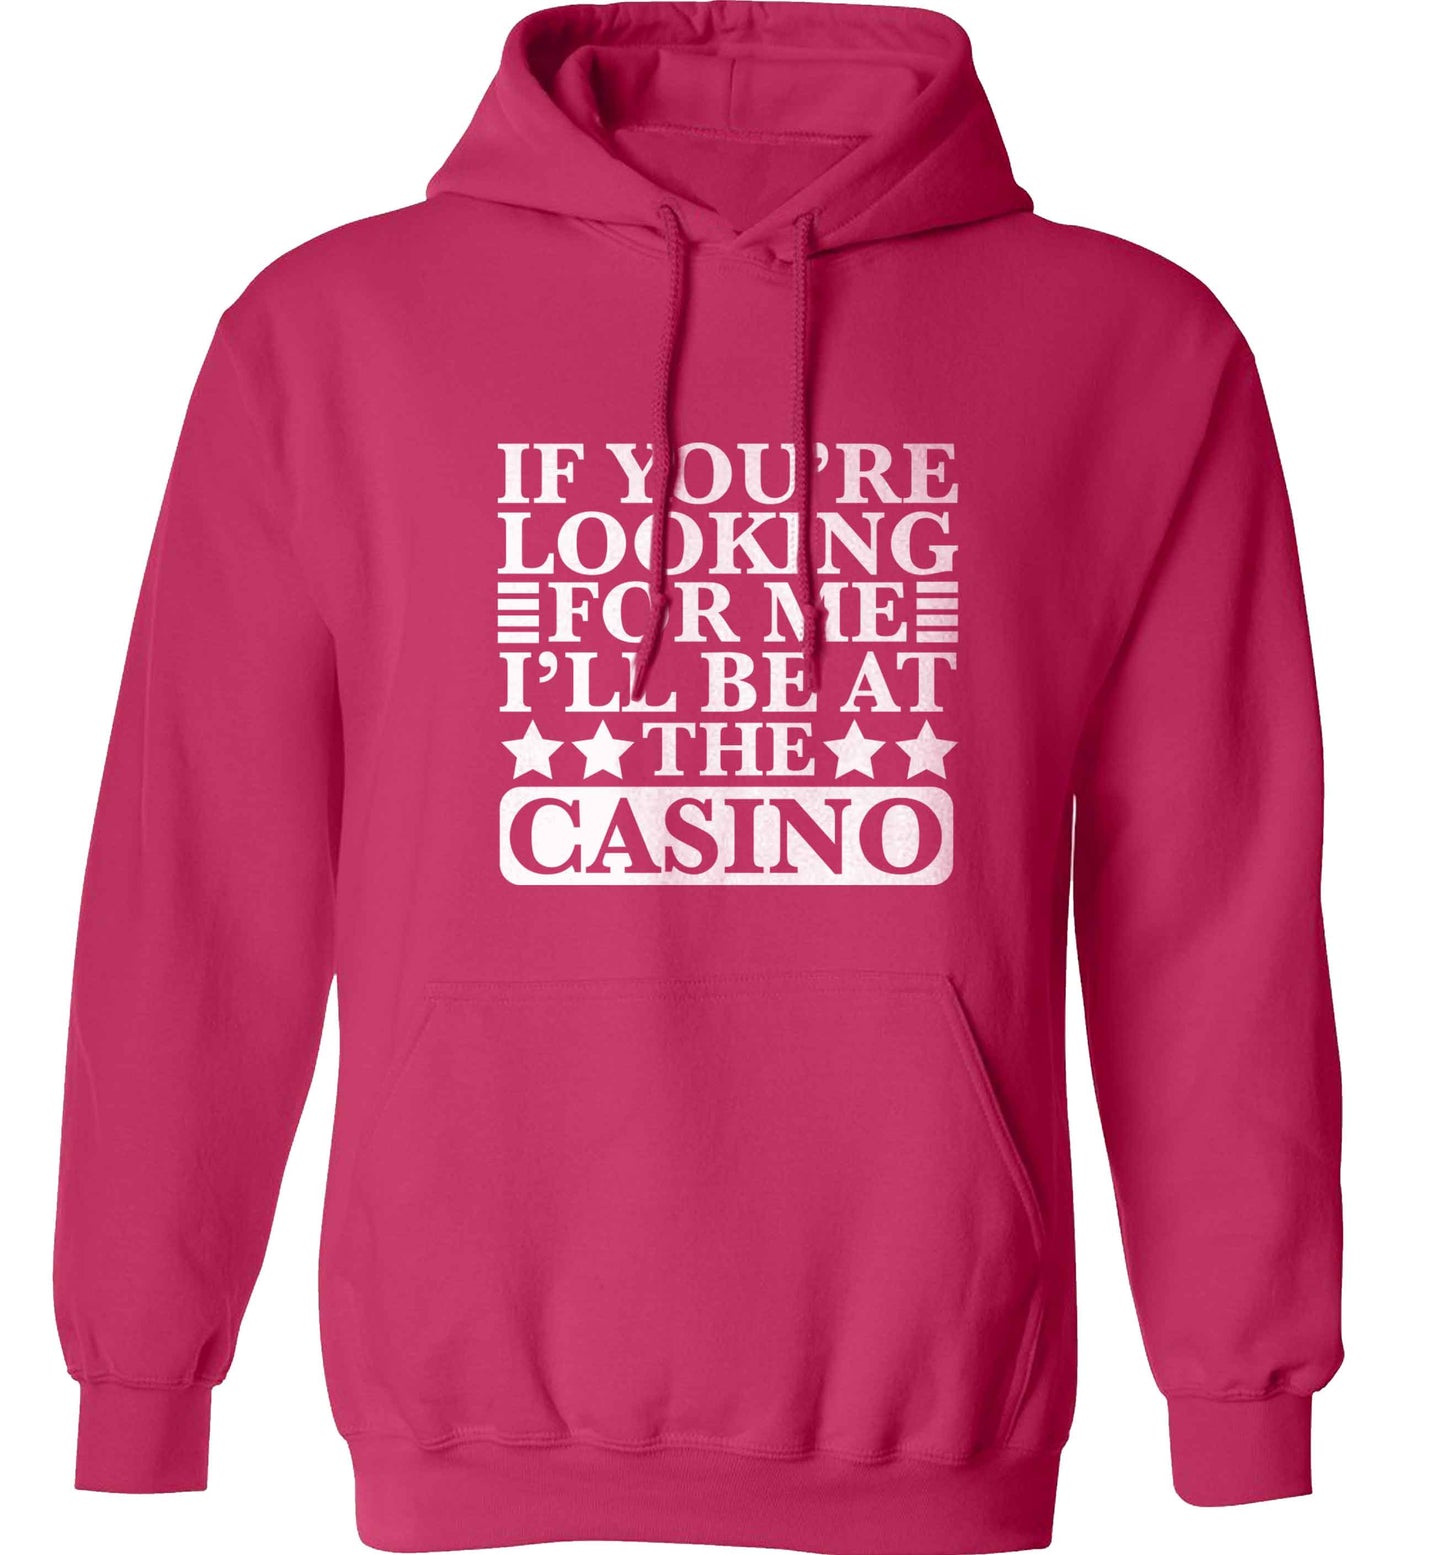 If you're looking for me I'll be at the casino adults unisex pink hoodie 2XL